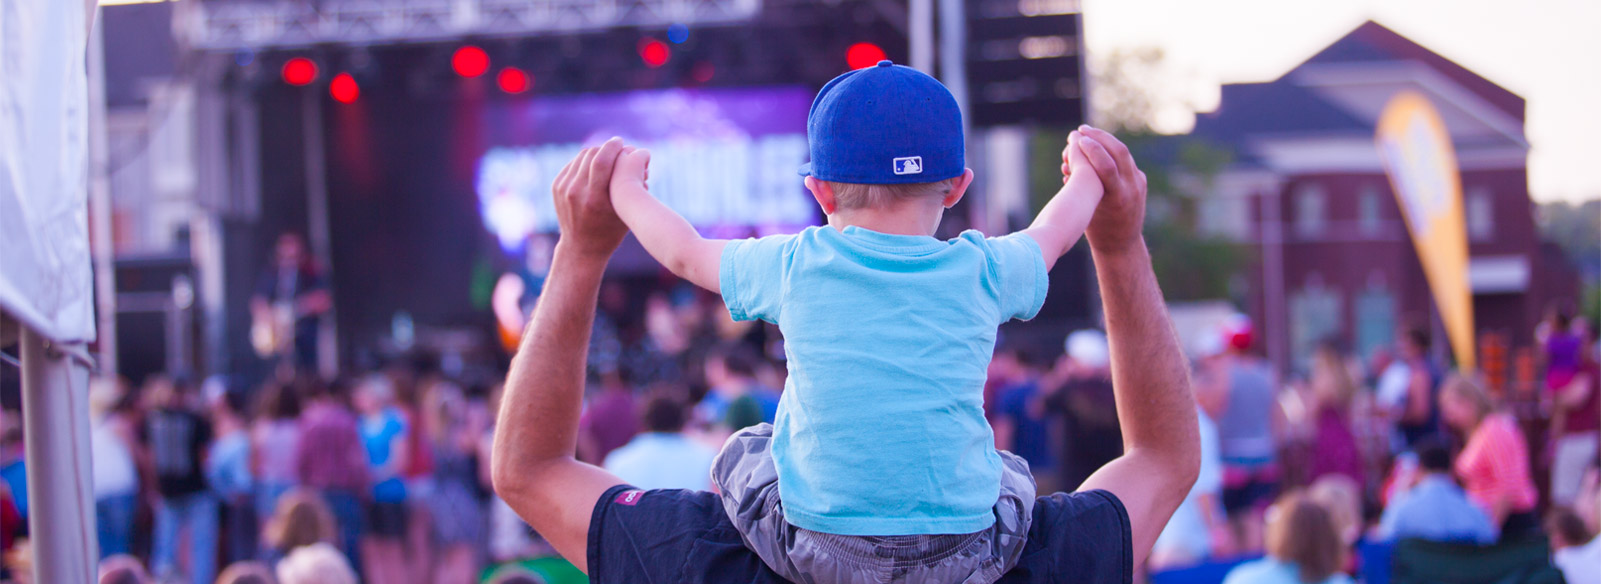 boy on man's shoulders watching a concert